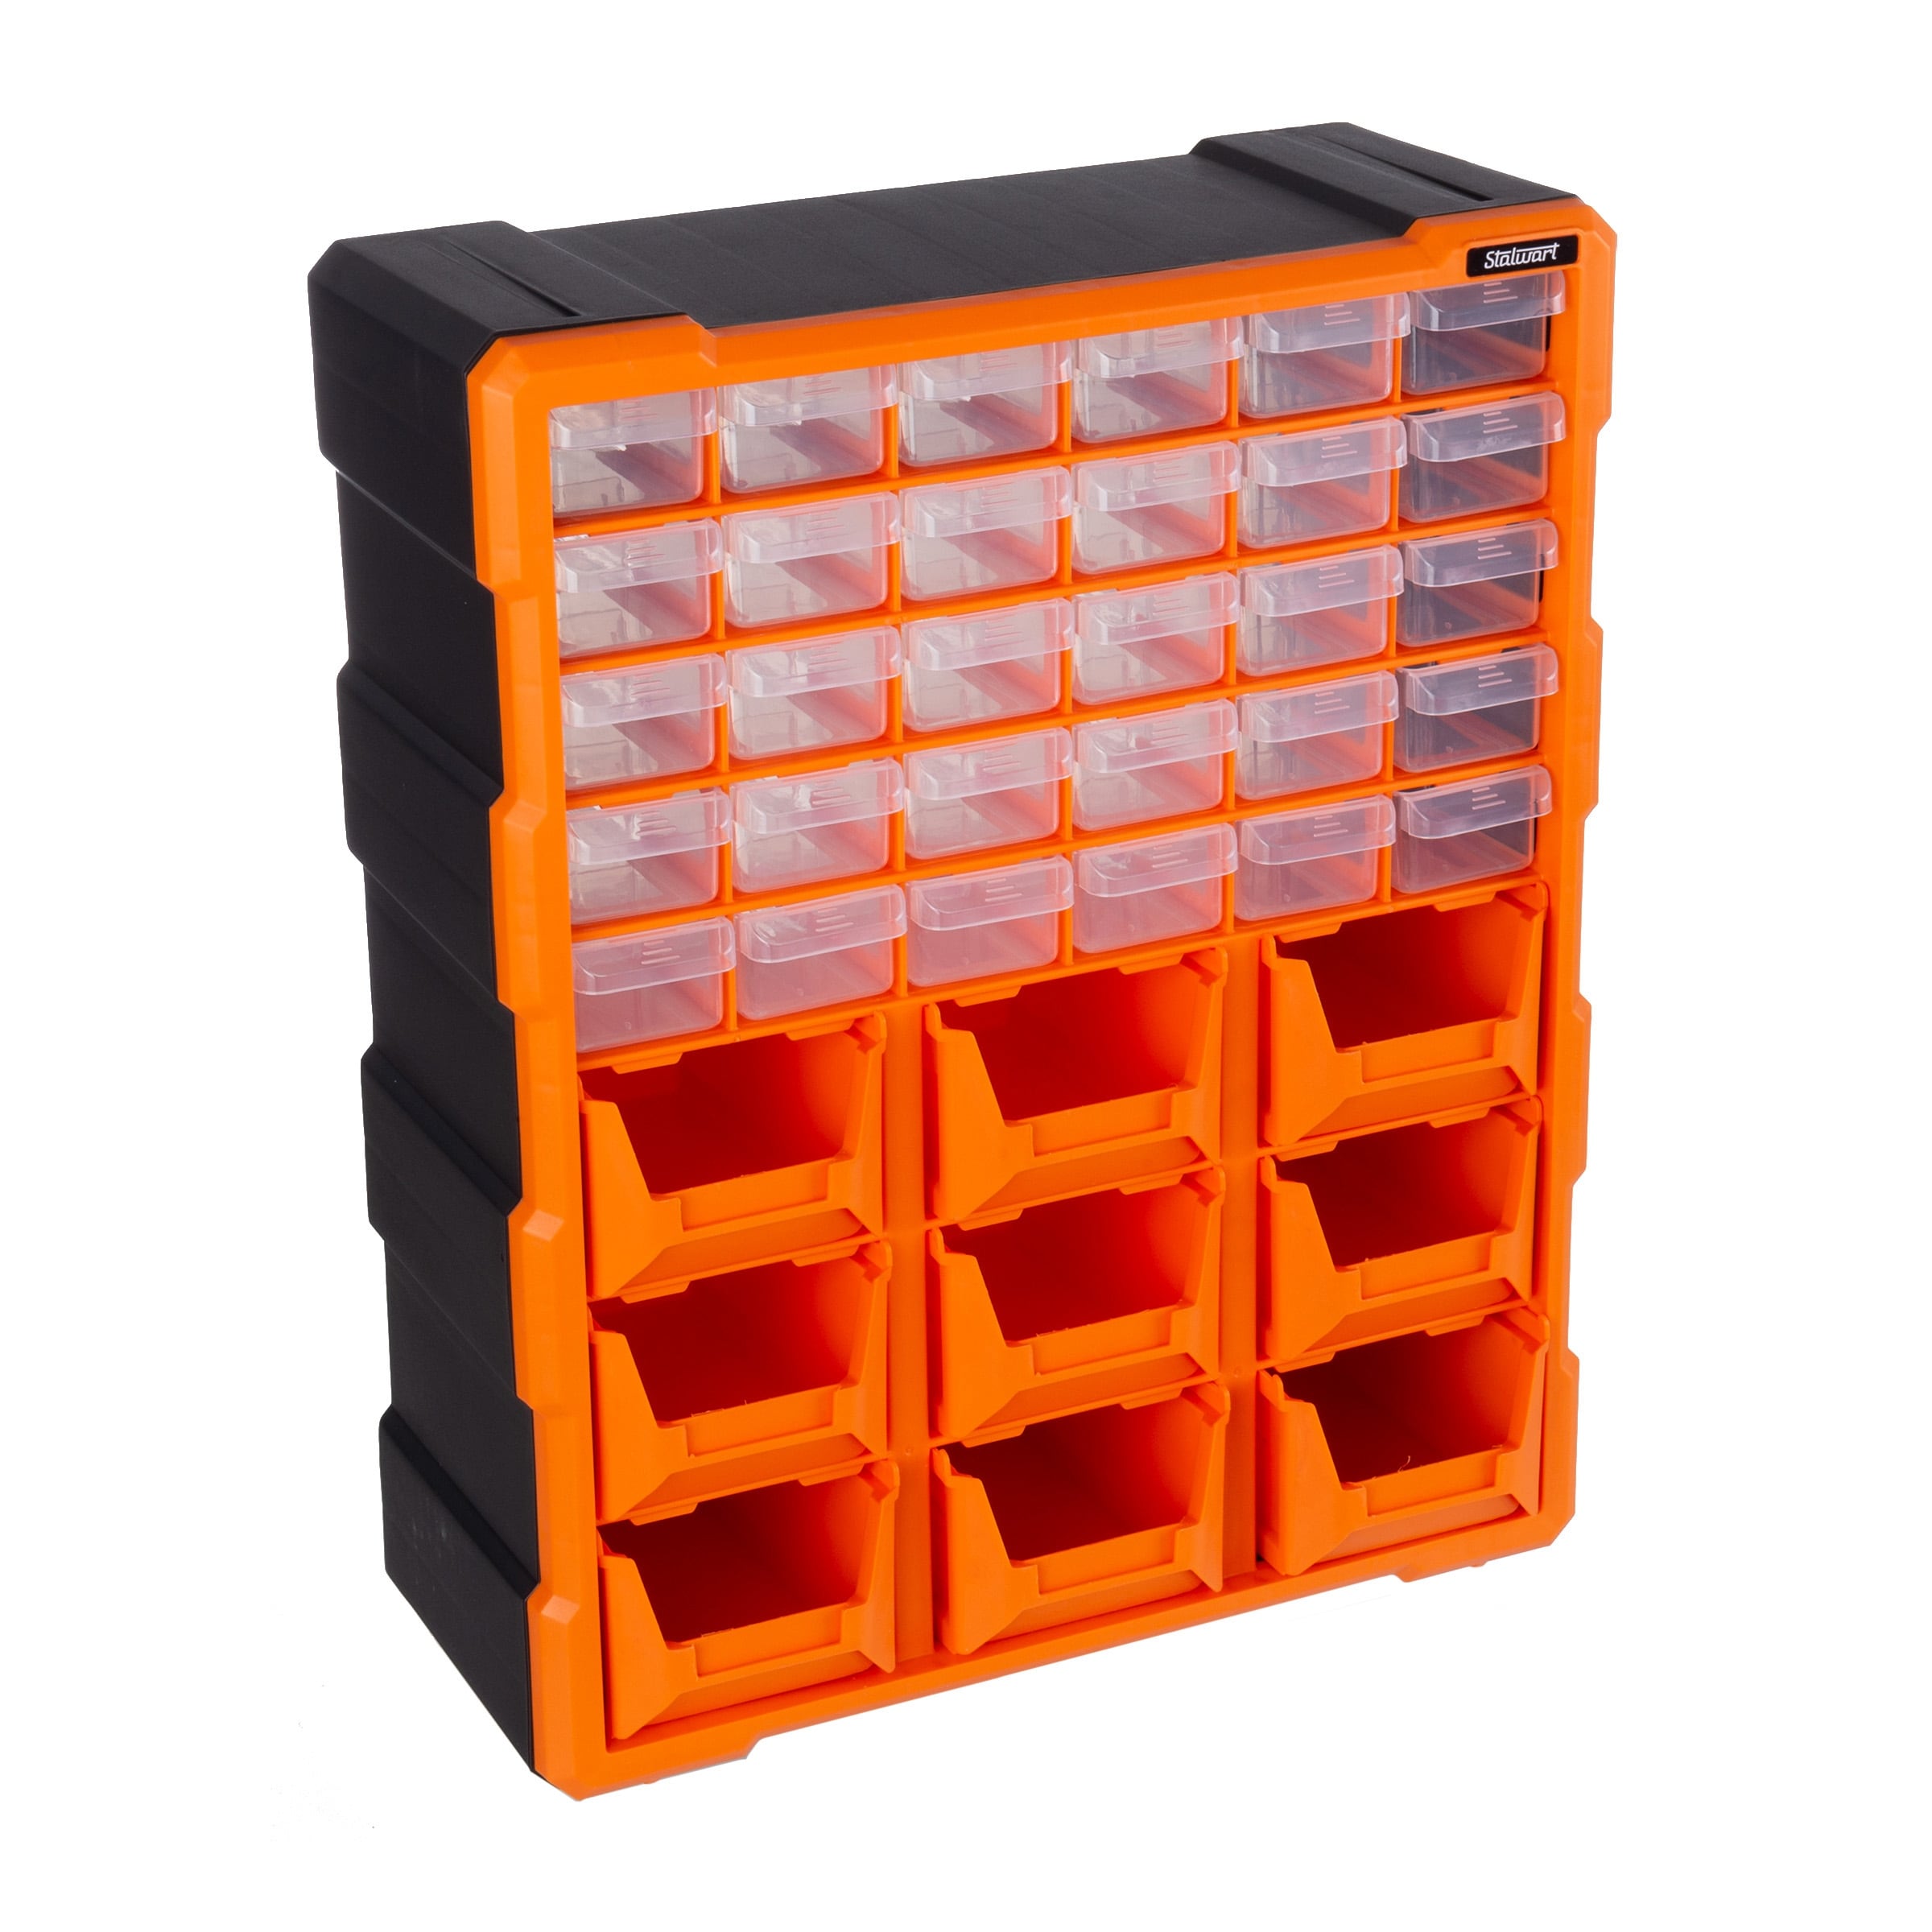 https://ak1.ostkcdn.com/images/products/is/images/direct/a15bf19643fee4cd2f58f1935f3dd5ece00cabfd/Plastic-Storage-Drawers---39-Drawer-Screw-Organizer-by-Stalwart-%28Black%29.jpg